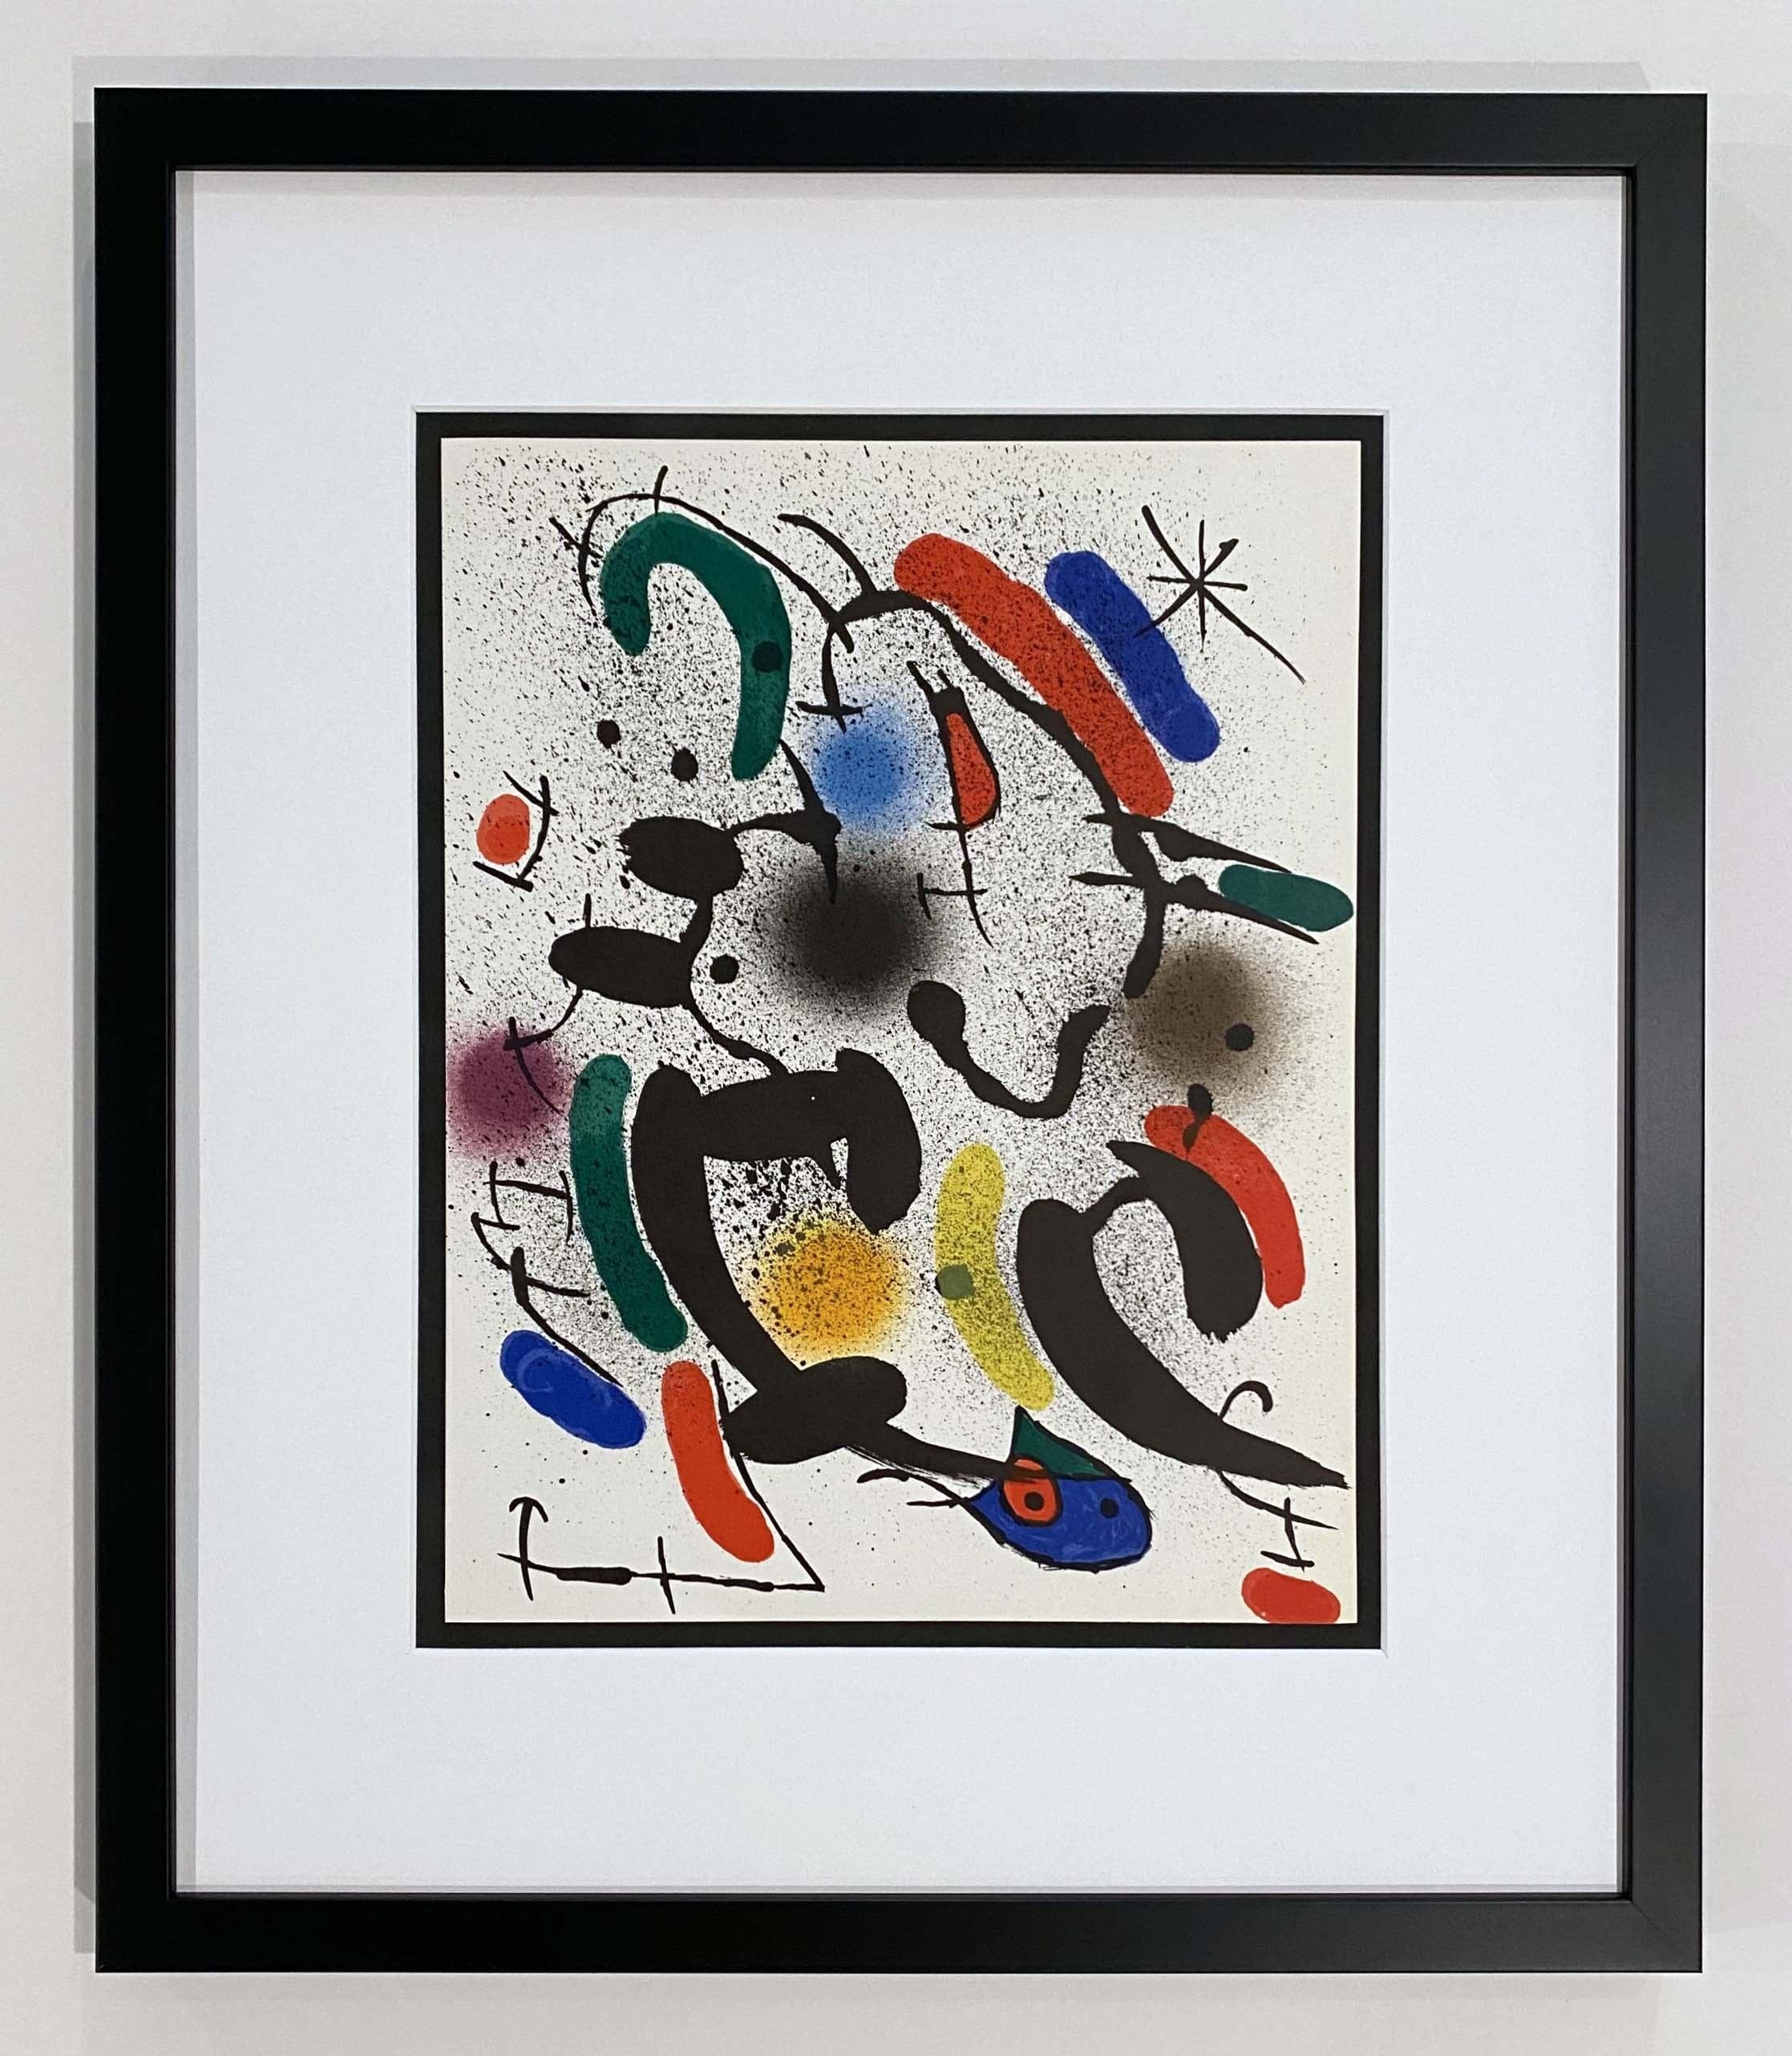 Plate VI, from 1972 Lithographe I - Print by Joan Miró